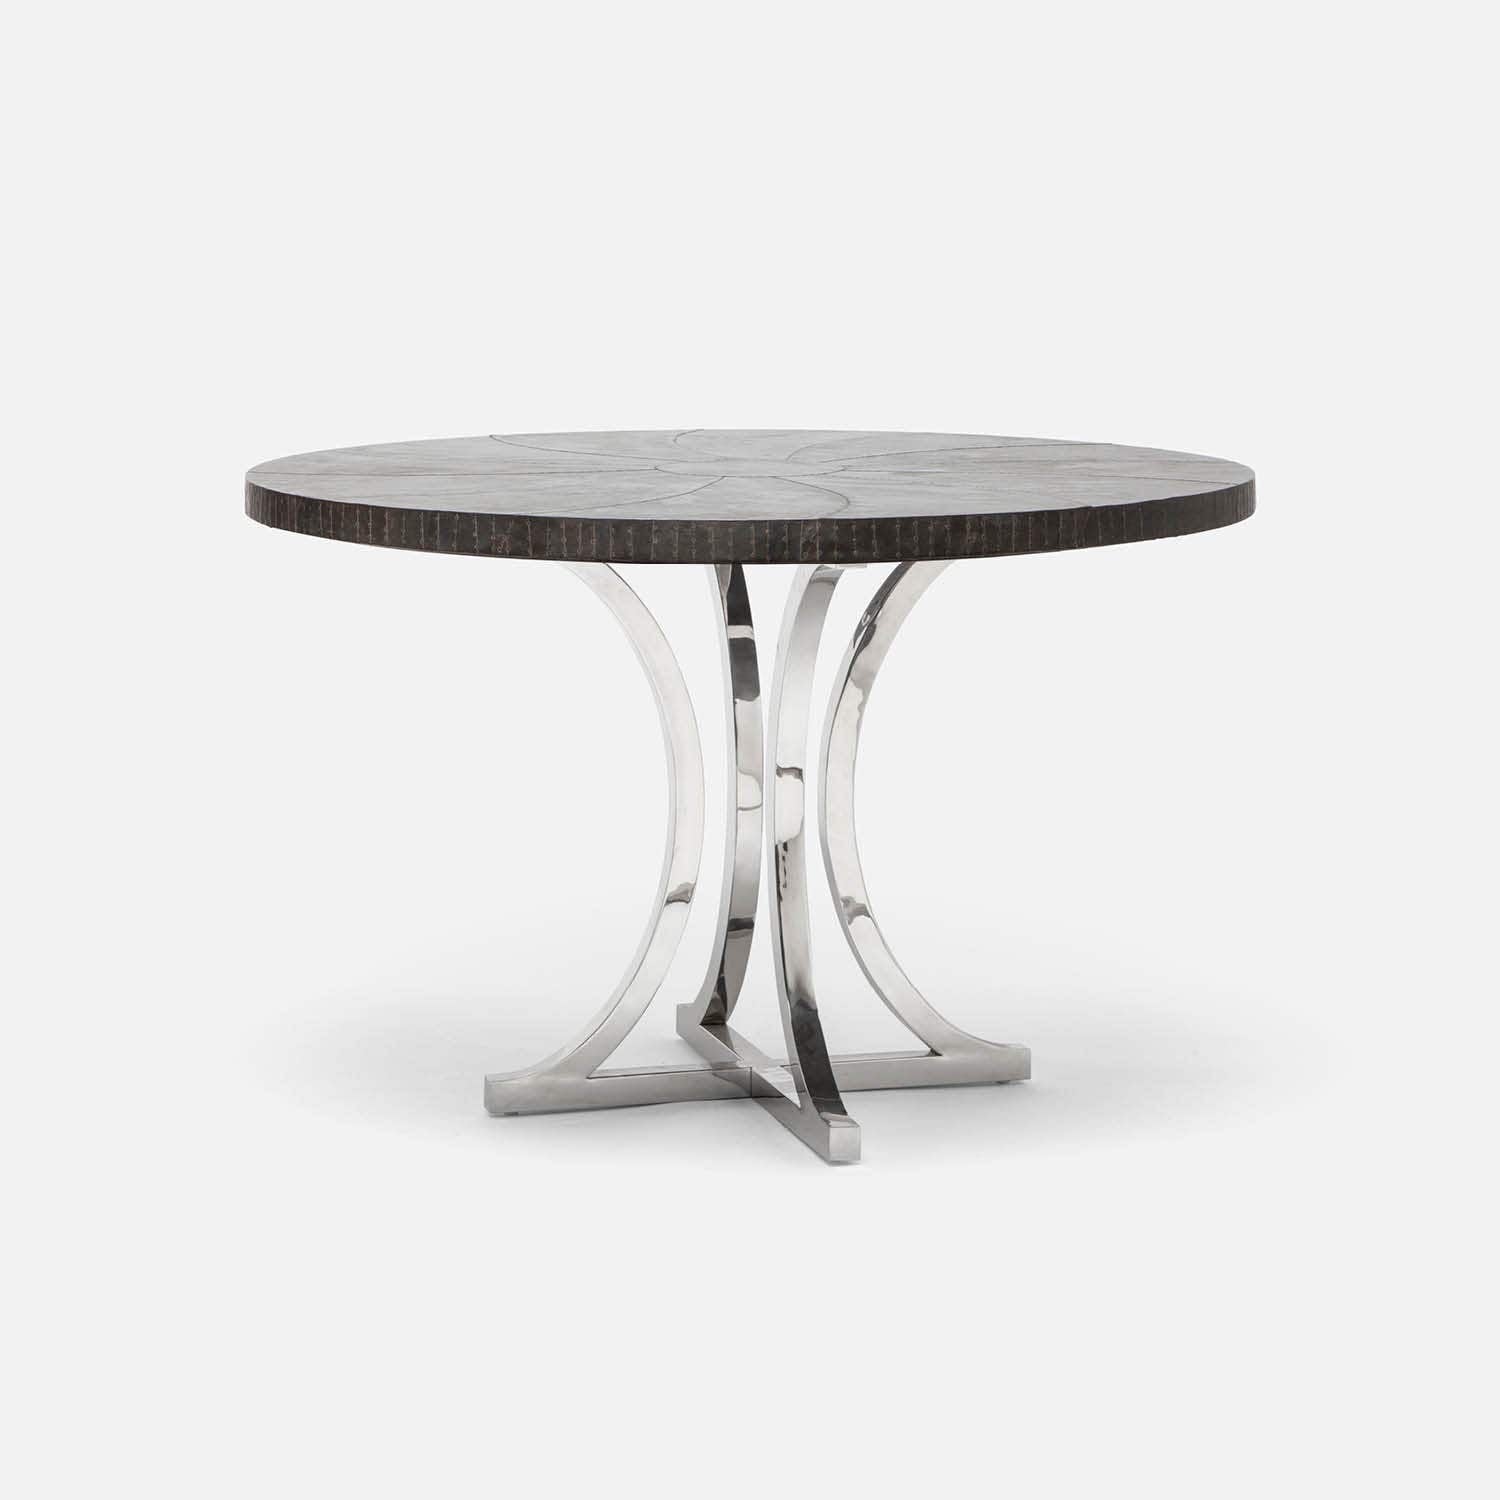 Made Goods Leighton 54" x 30" Polished Silver Steel Dinning Table With Round Zinc Metal Table Top